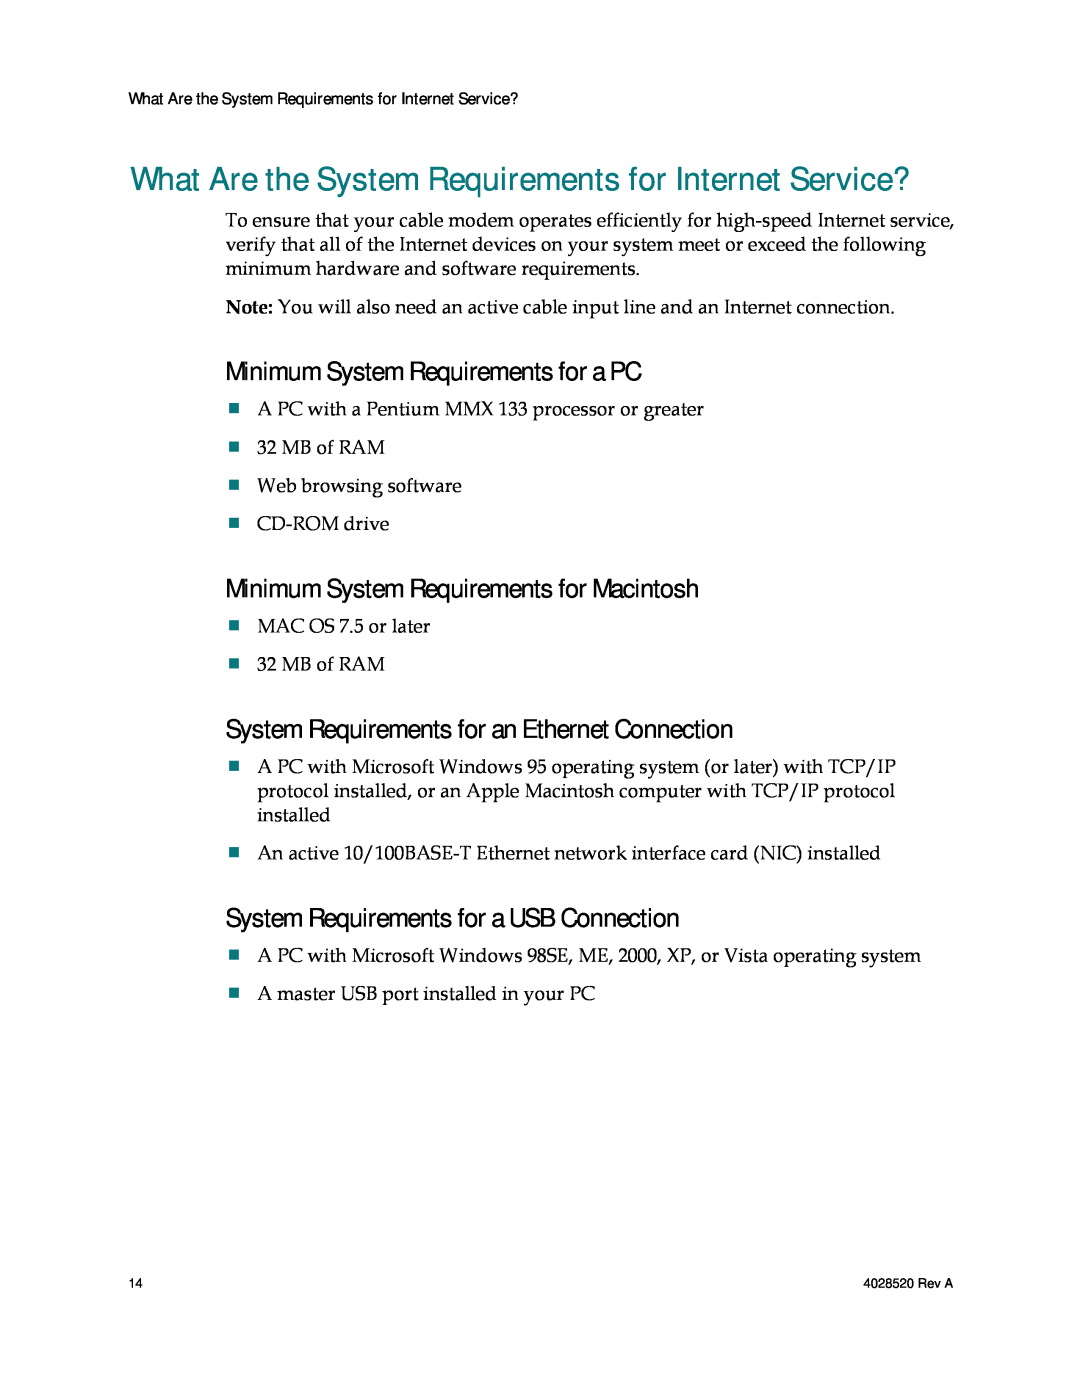 Cisco Systems DPQ2202 What Are the System Requirements for Internet Service?, Minimum System Requirements for a PC 